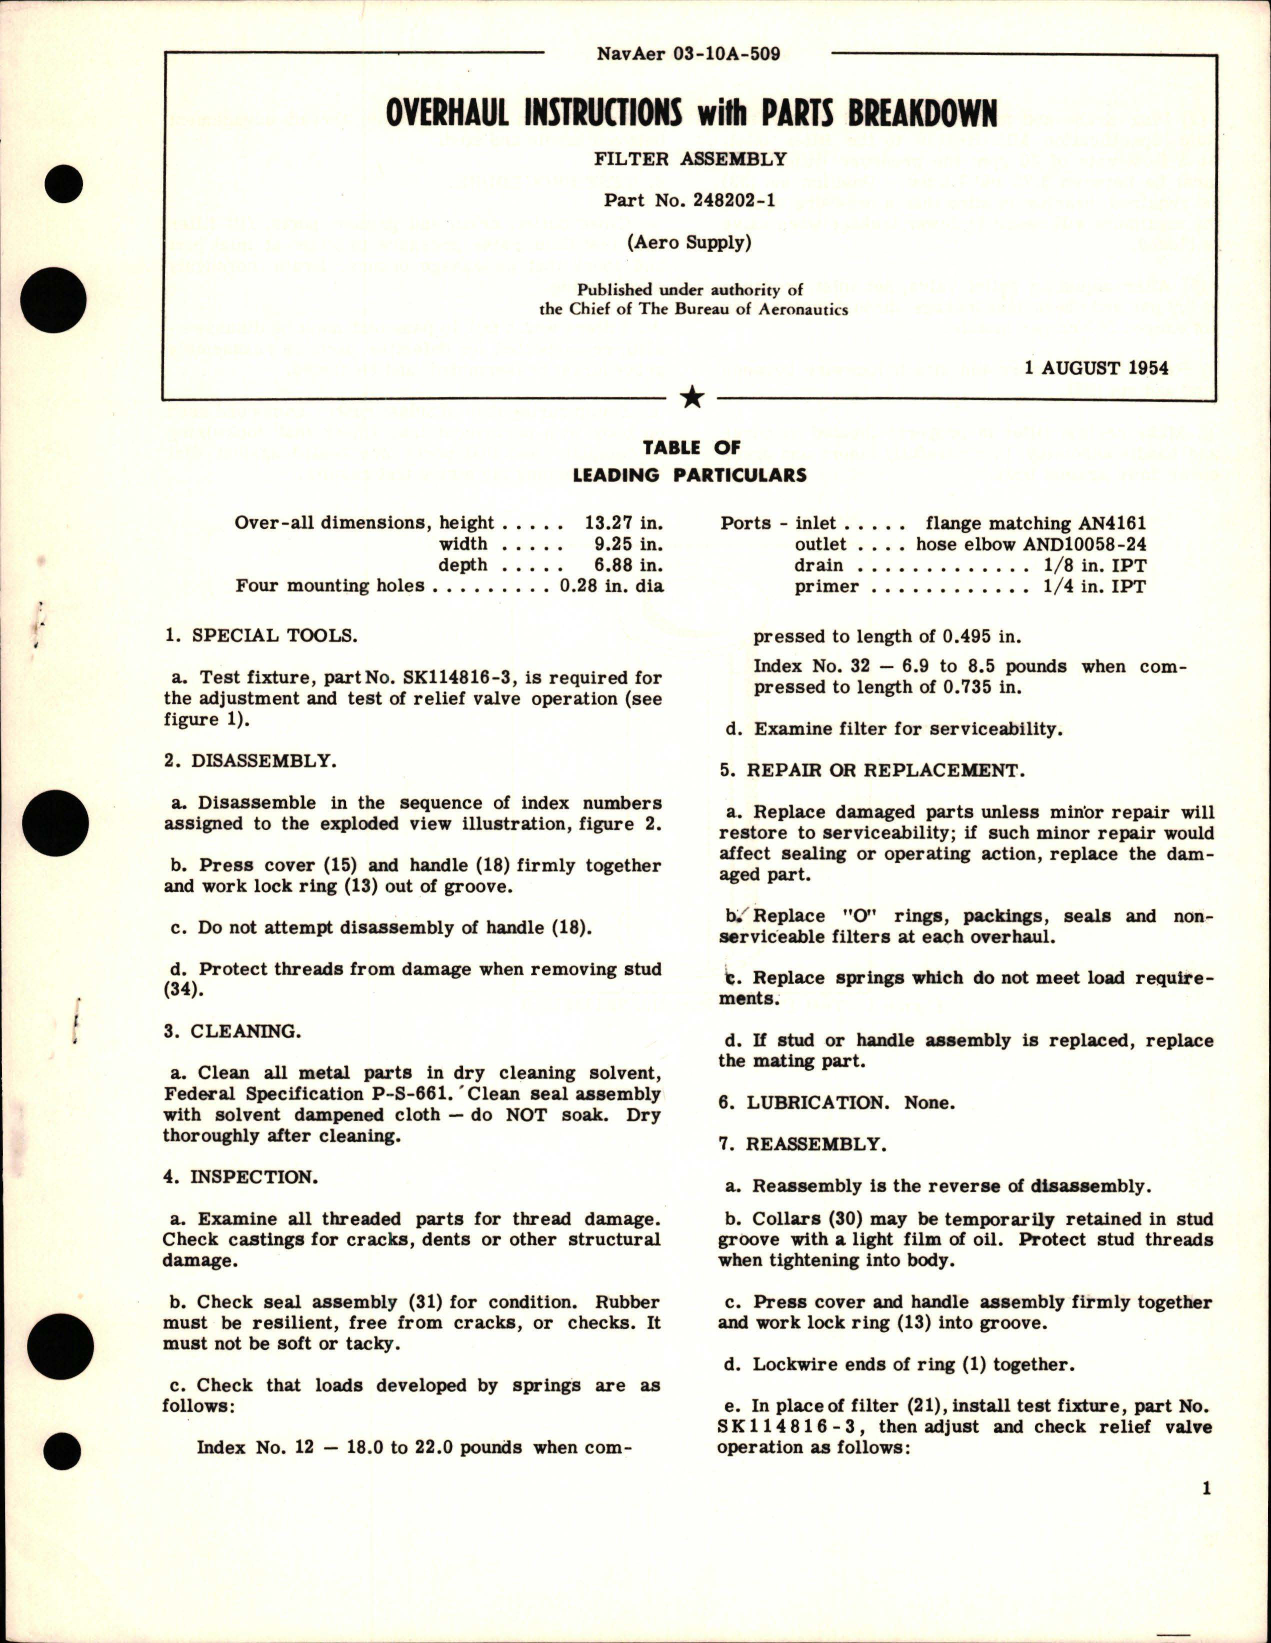 Sample page 1 from AirCorps Library document: Overhaul Instructions with Parts Breakdown for Filter Assembly - Part 248202-1